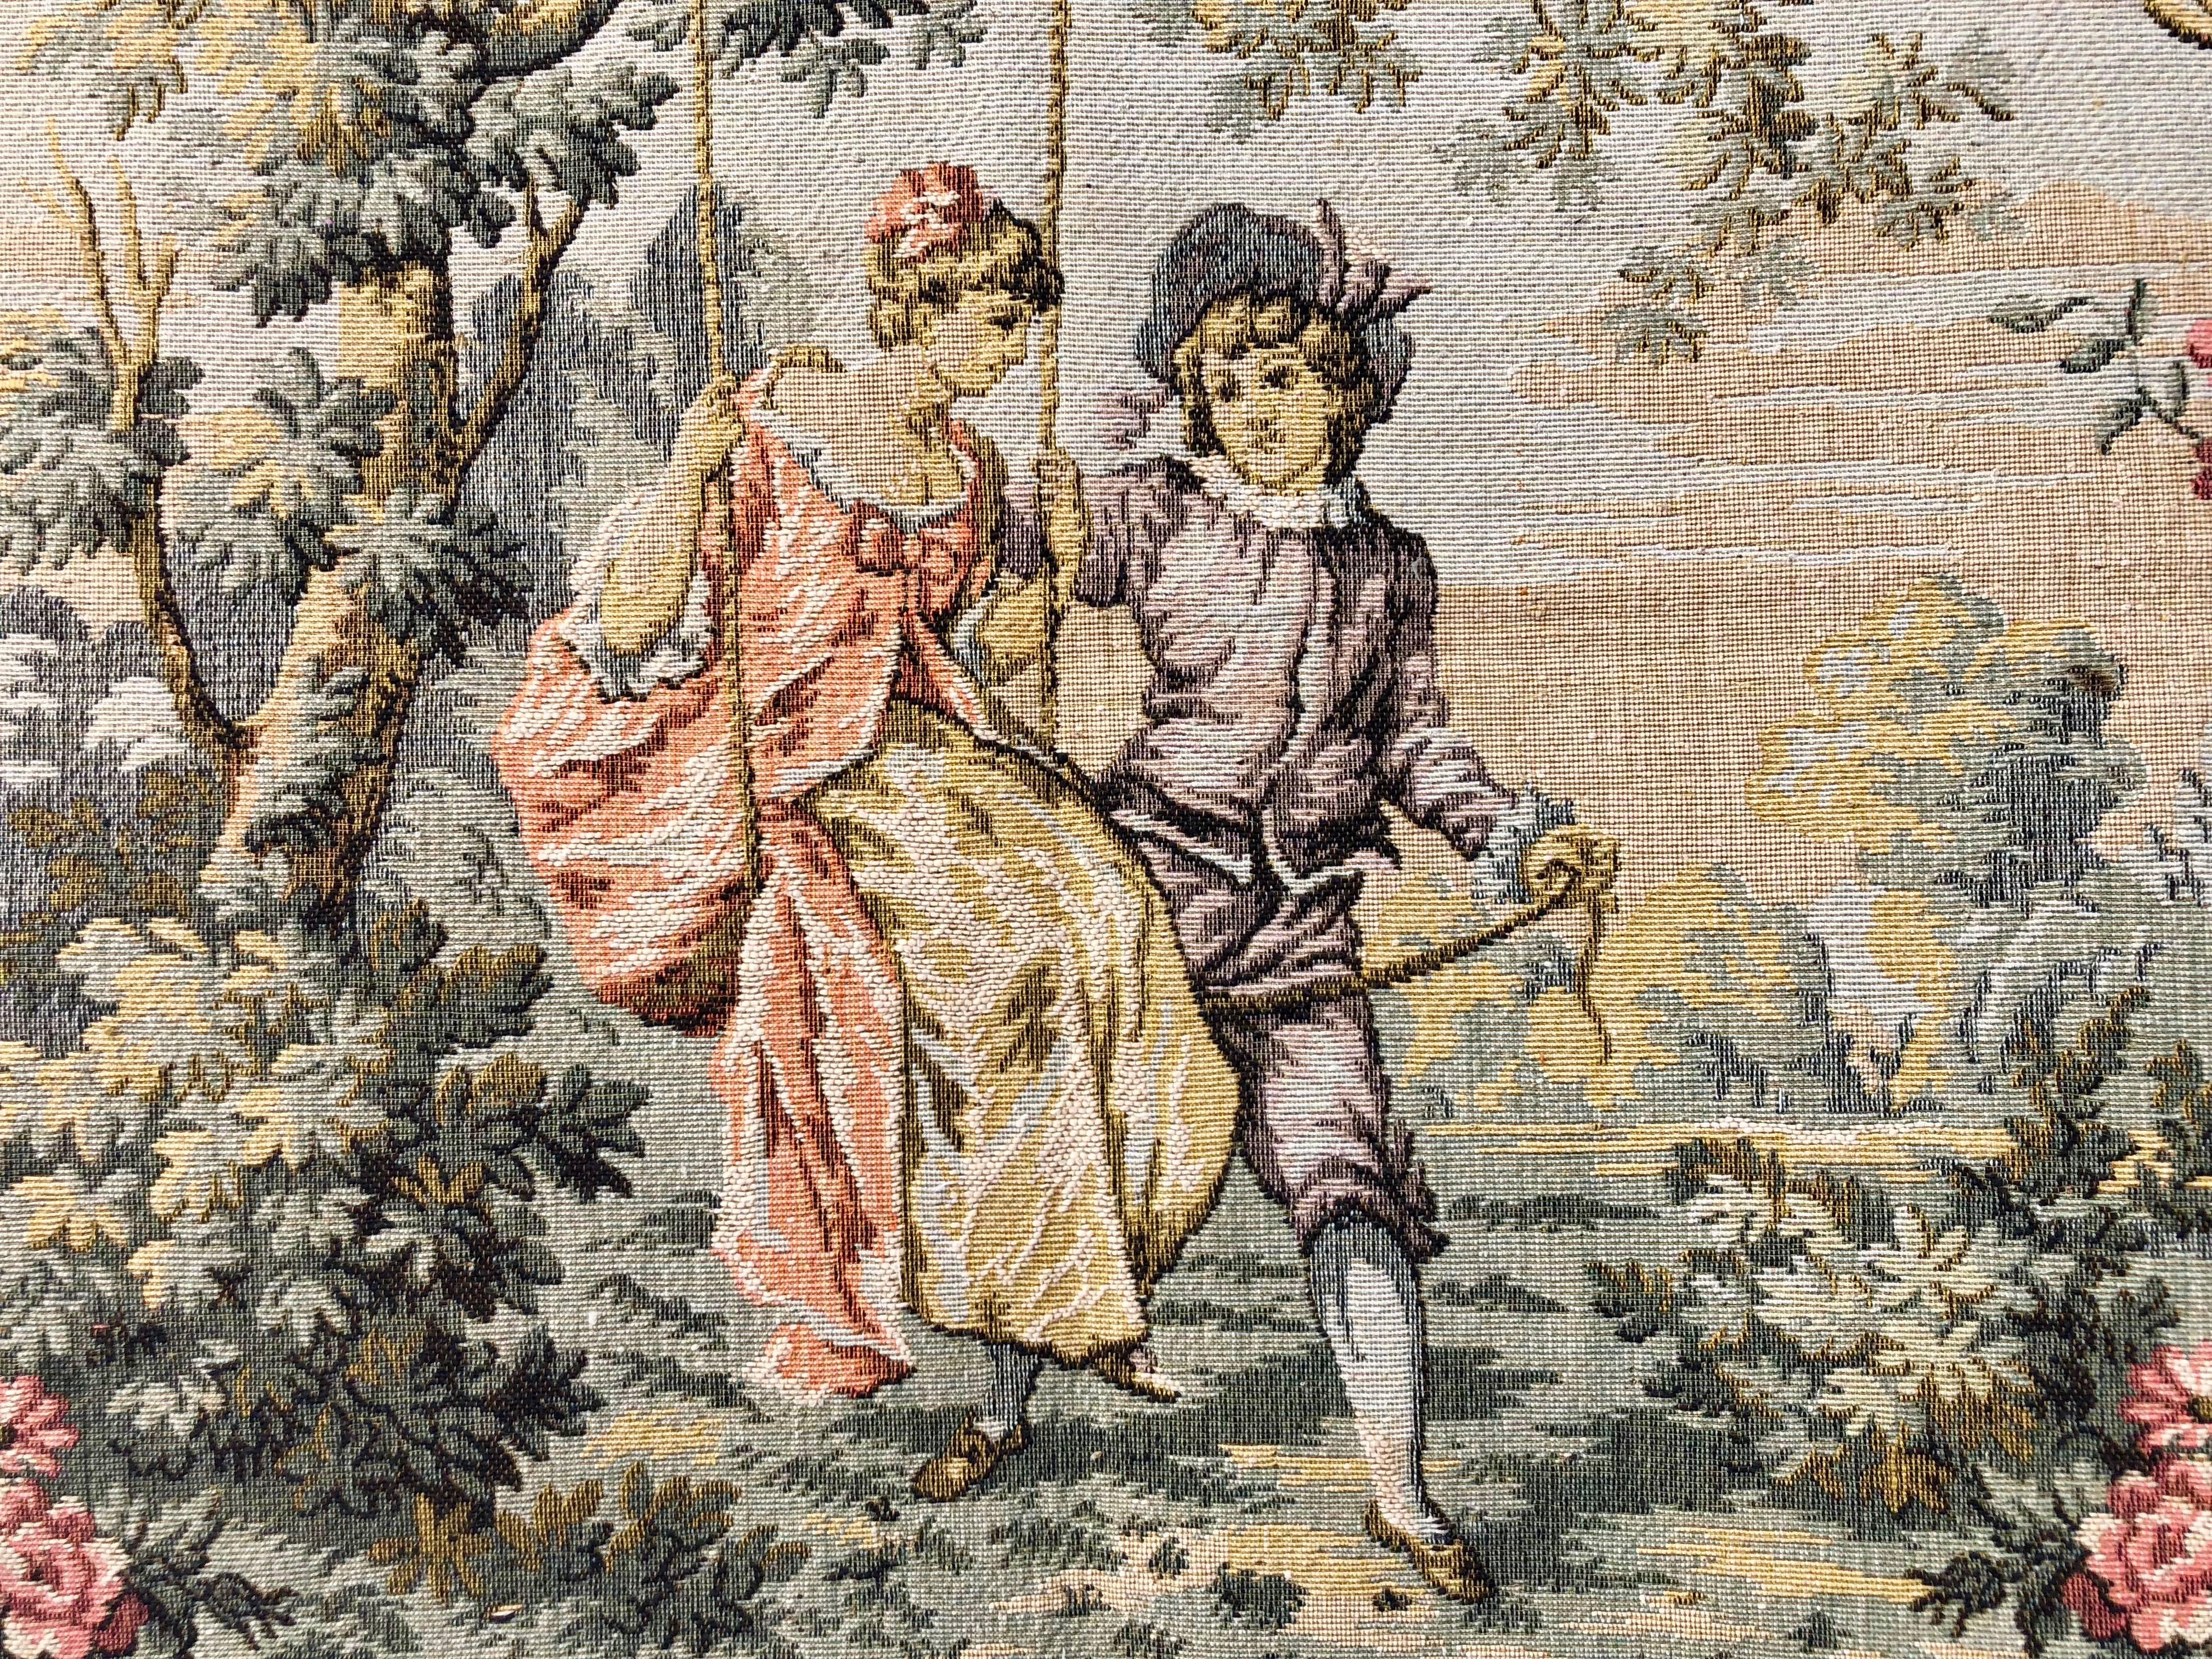 A lovely machine woven jacquard tapestry with multiple colors depicting a pastoral scene of a girl on a swing with her beau. The background color is a pretty green and the scene is surrounded by a woven scroll work design in gold and tan tones. The